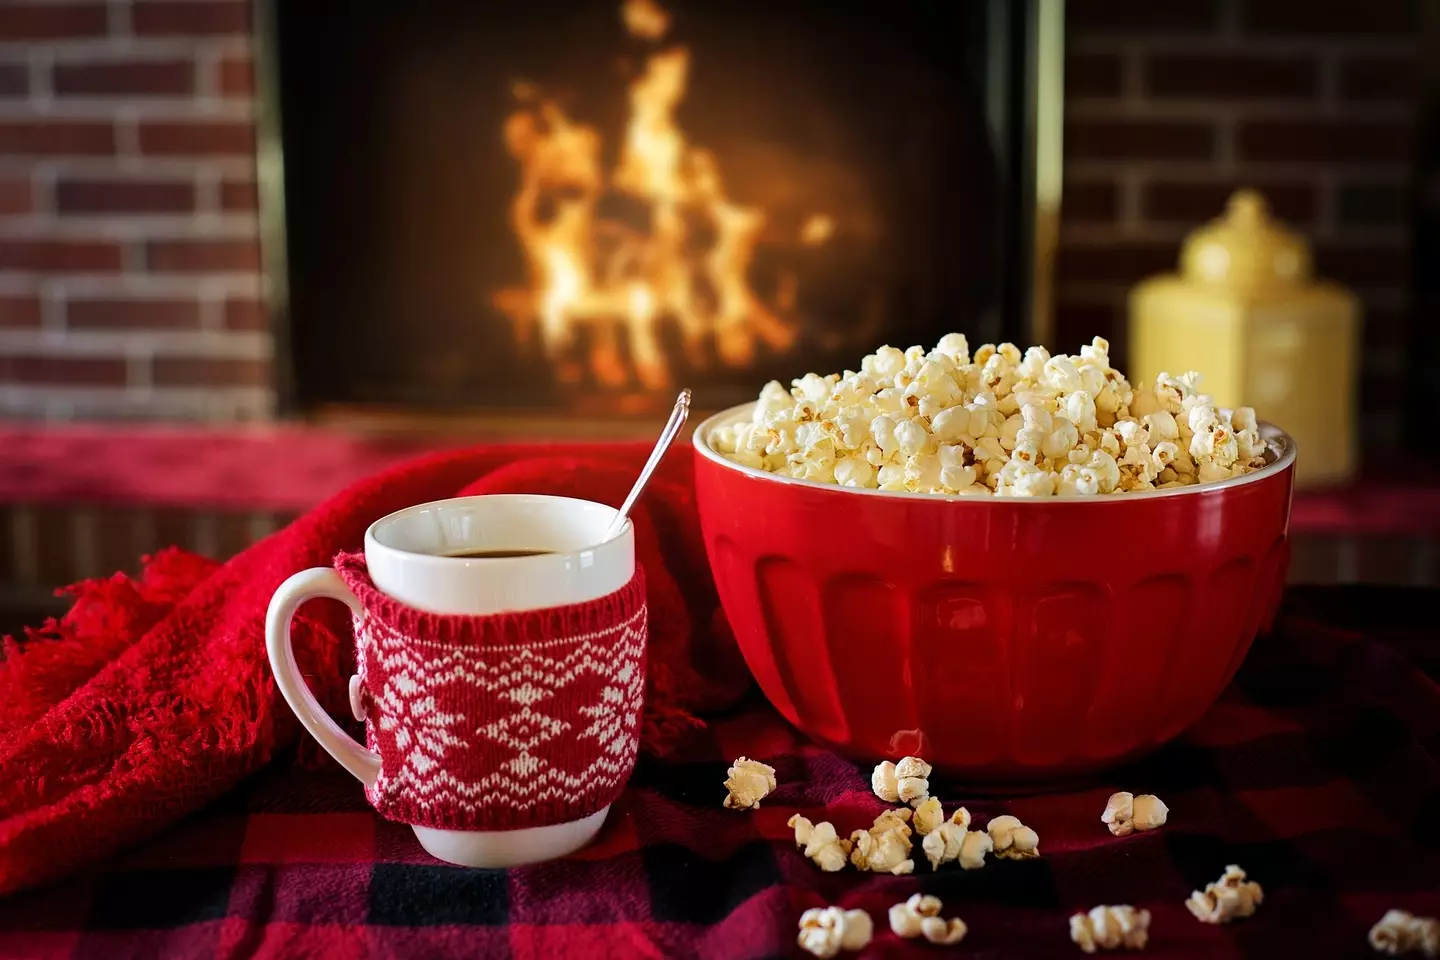 Brits will have even more time for Christmas films this year.